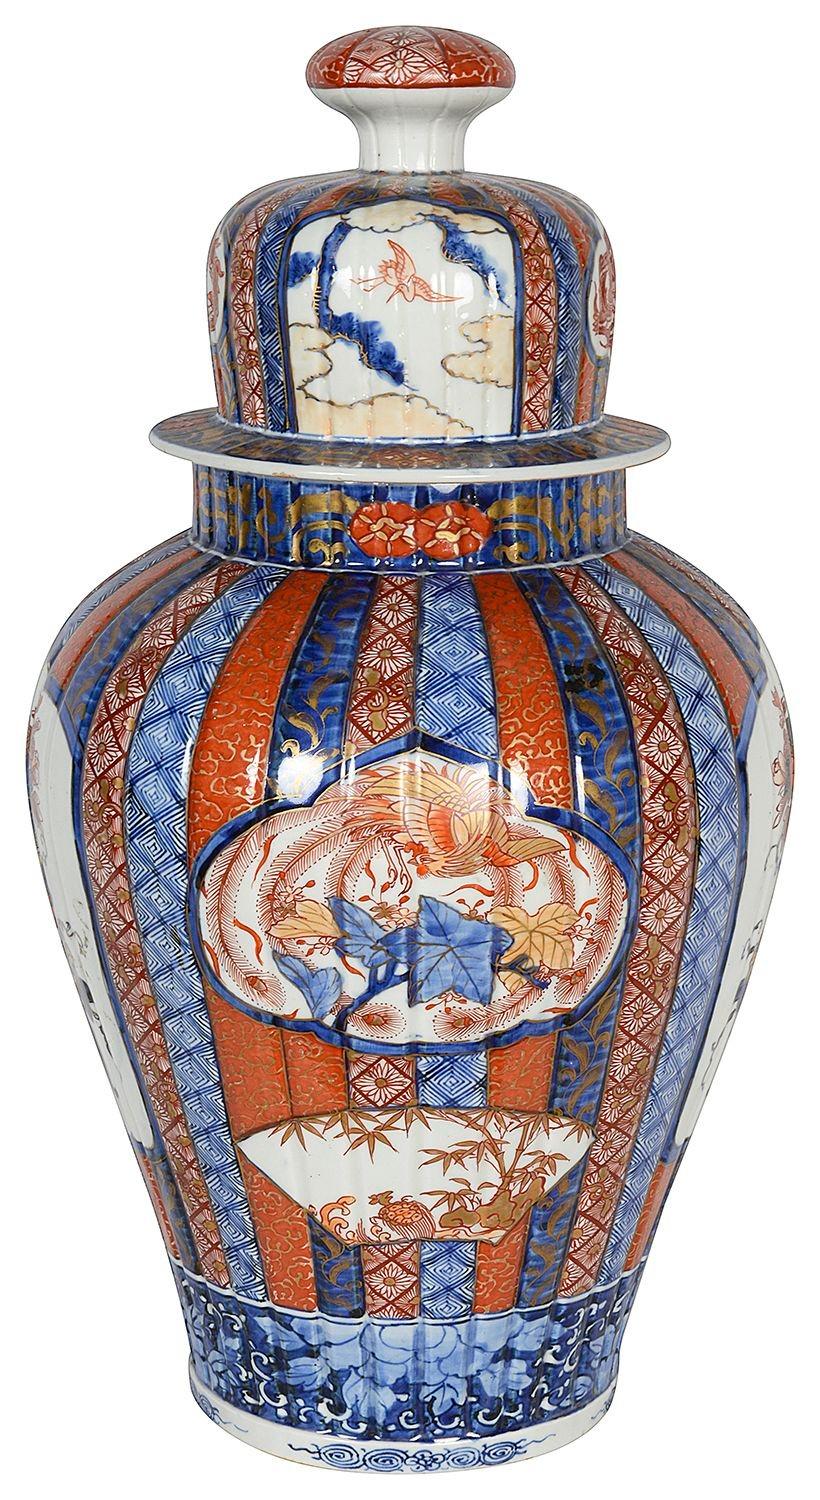 A very good quality late 19th Century Japanese lidded Imari vase, having wonderful bold colouring to the classical motif decoration, set in scolloped vertical bands with inset hand painted panels depicting exotic flowers on a table, mythical dragons